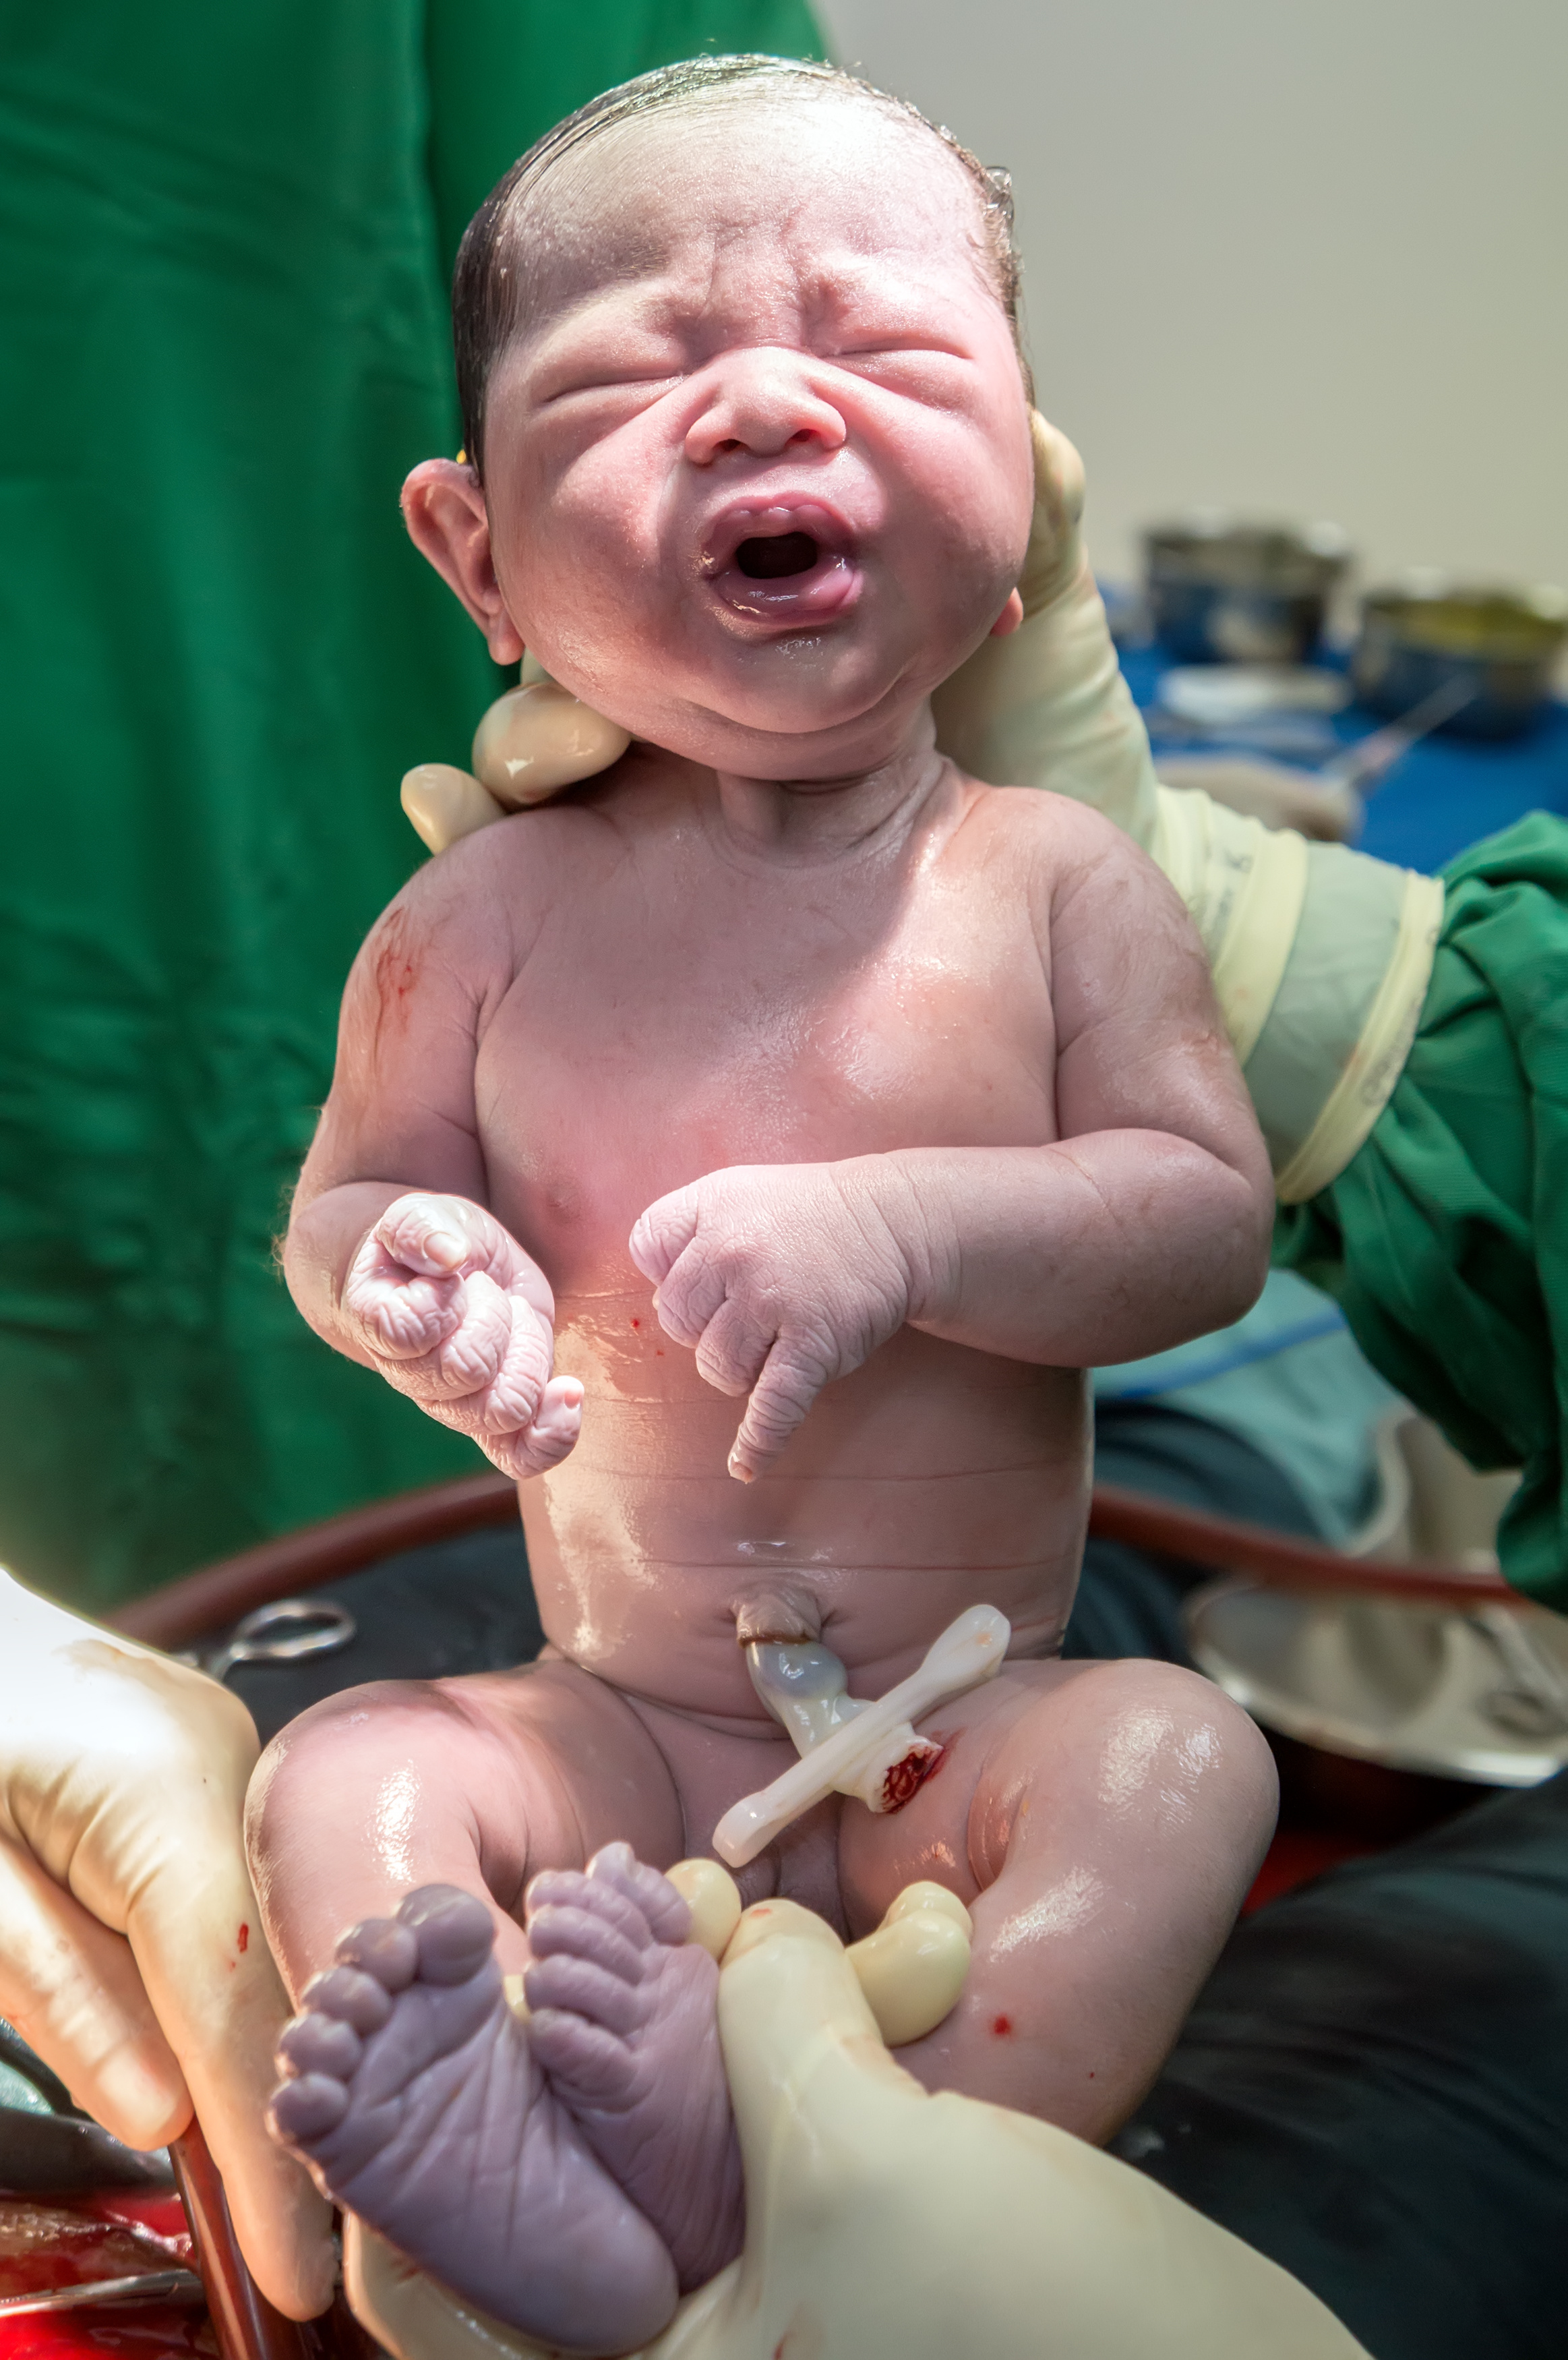 Operation for cesarean section with new born infant in operating